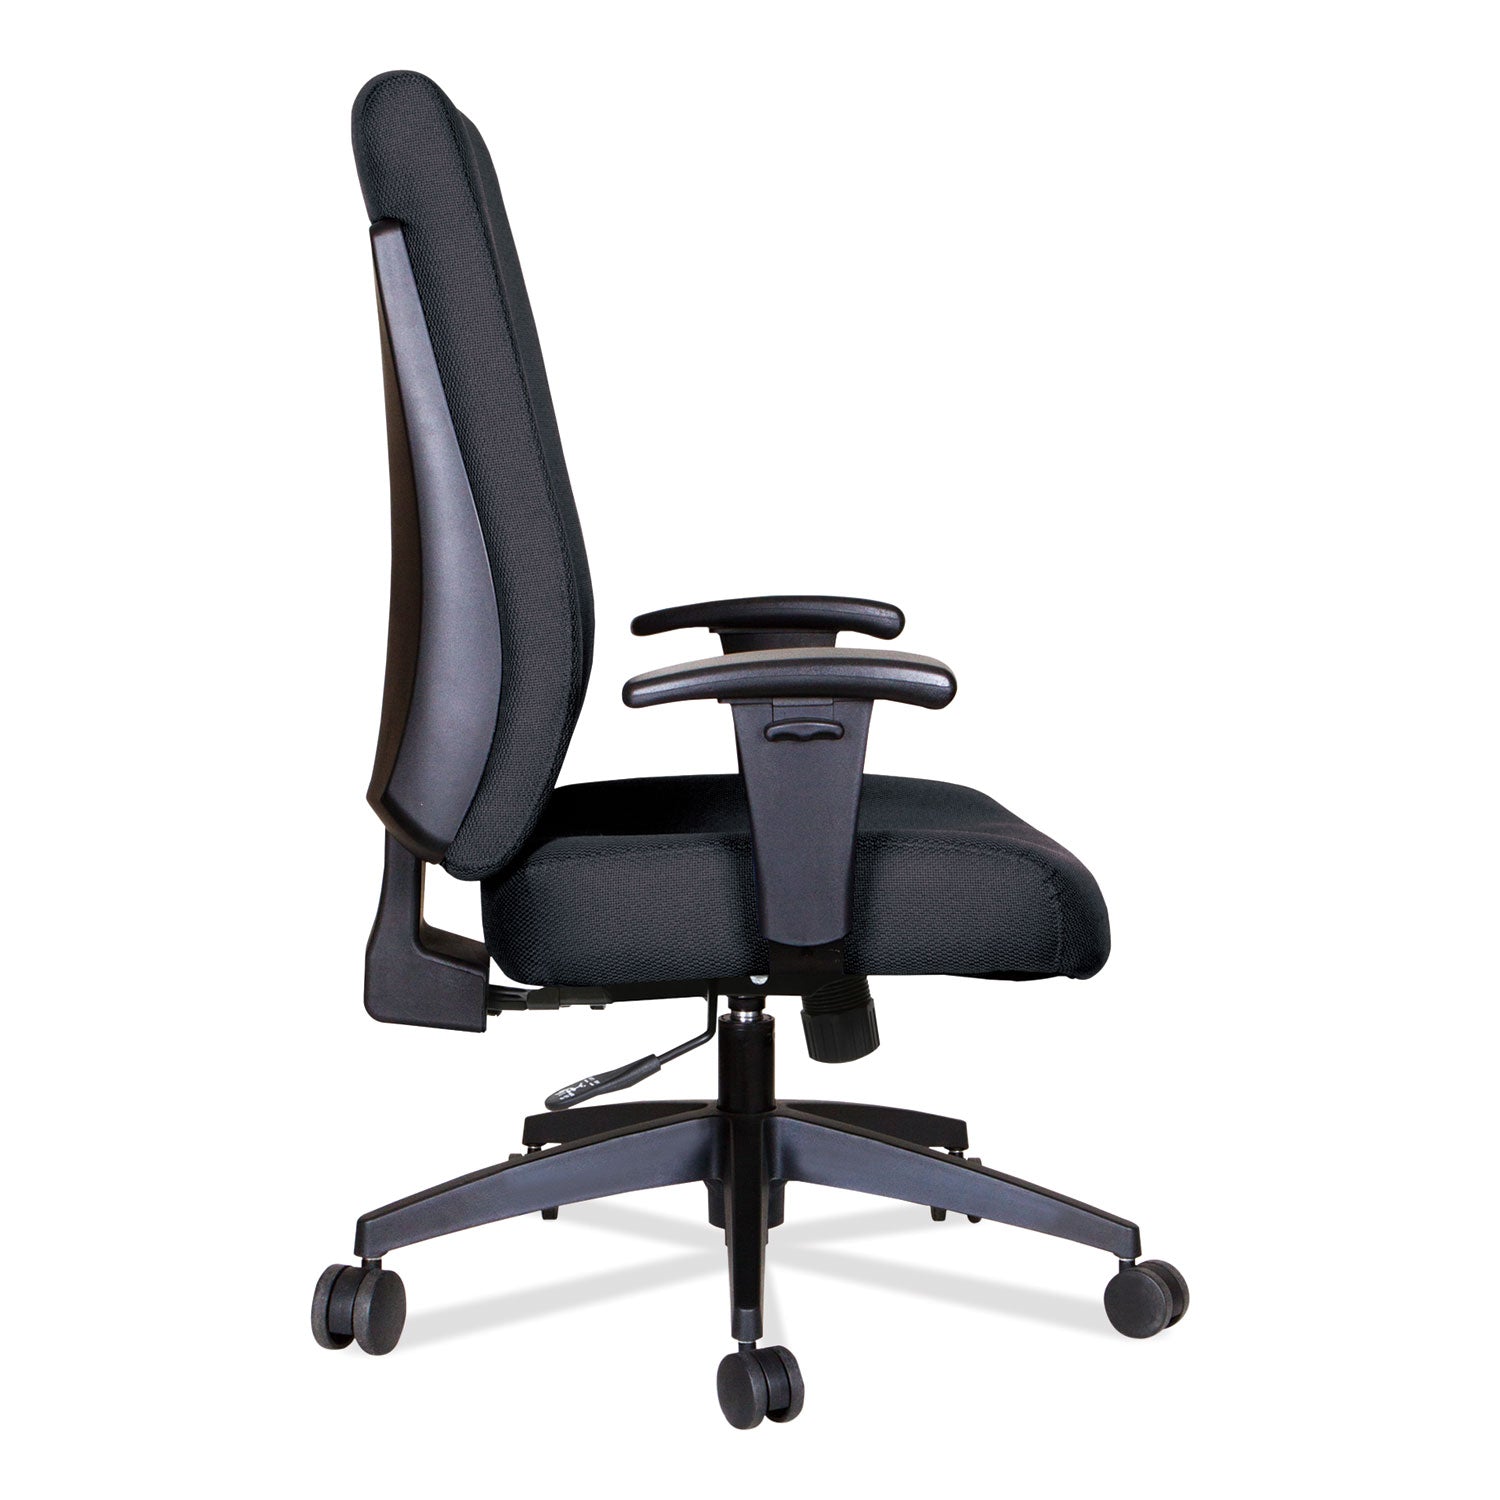 alera-wrigley-series-high-performance-high-back-synchro-tilt-task-chair-supports-275-lb-1724-to-2055-seat-height-black_alehps4101 - 8